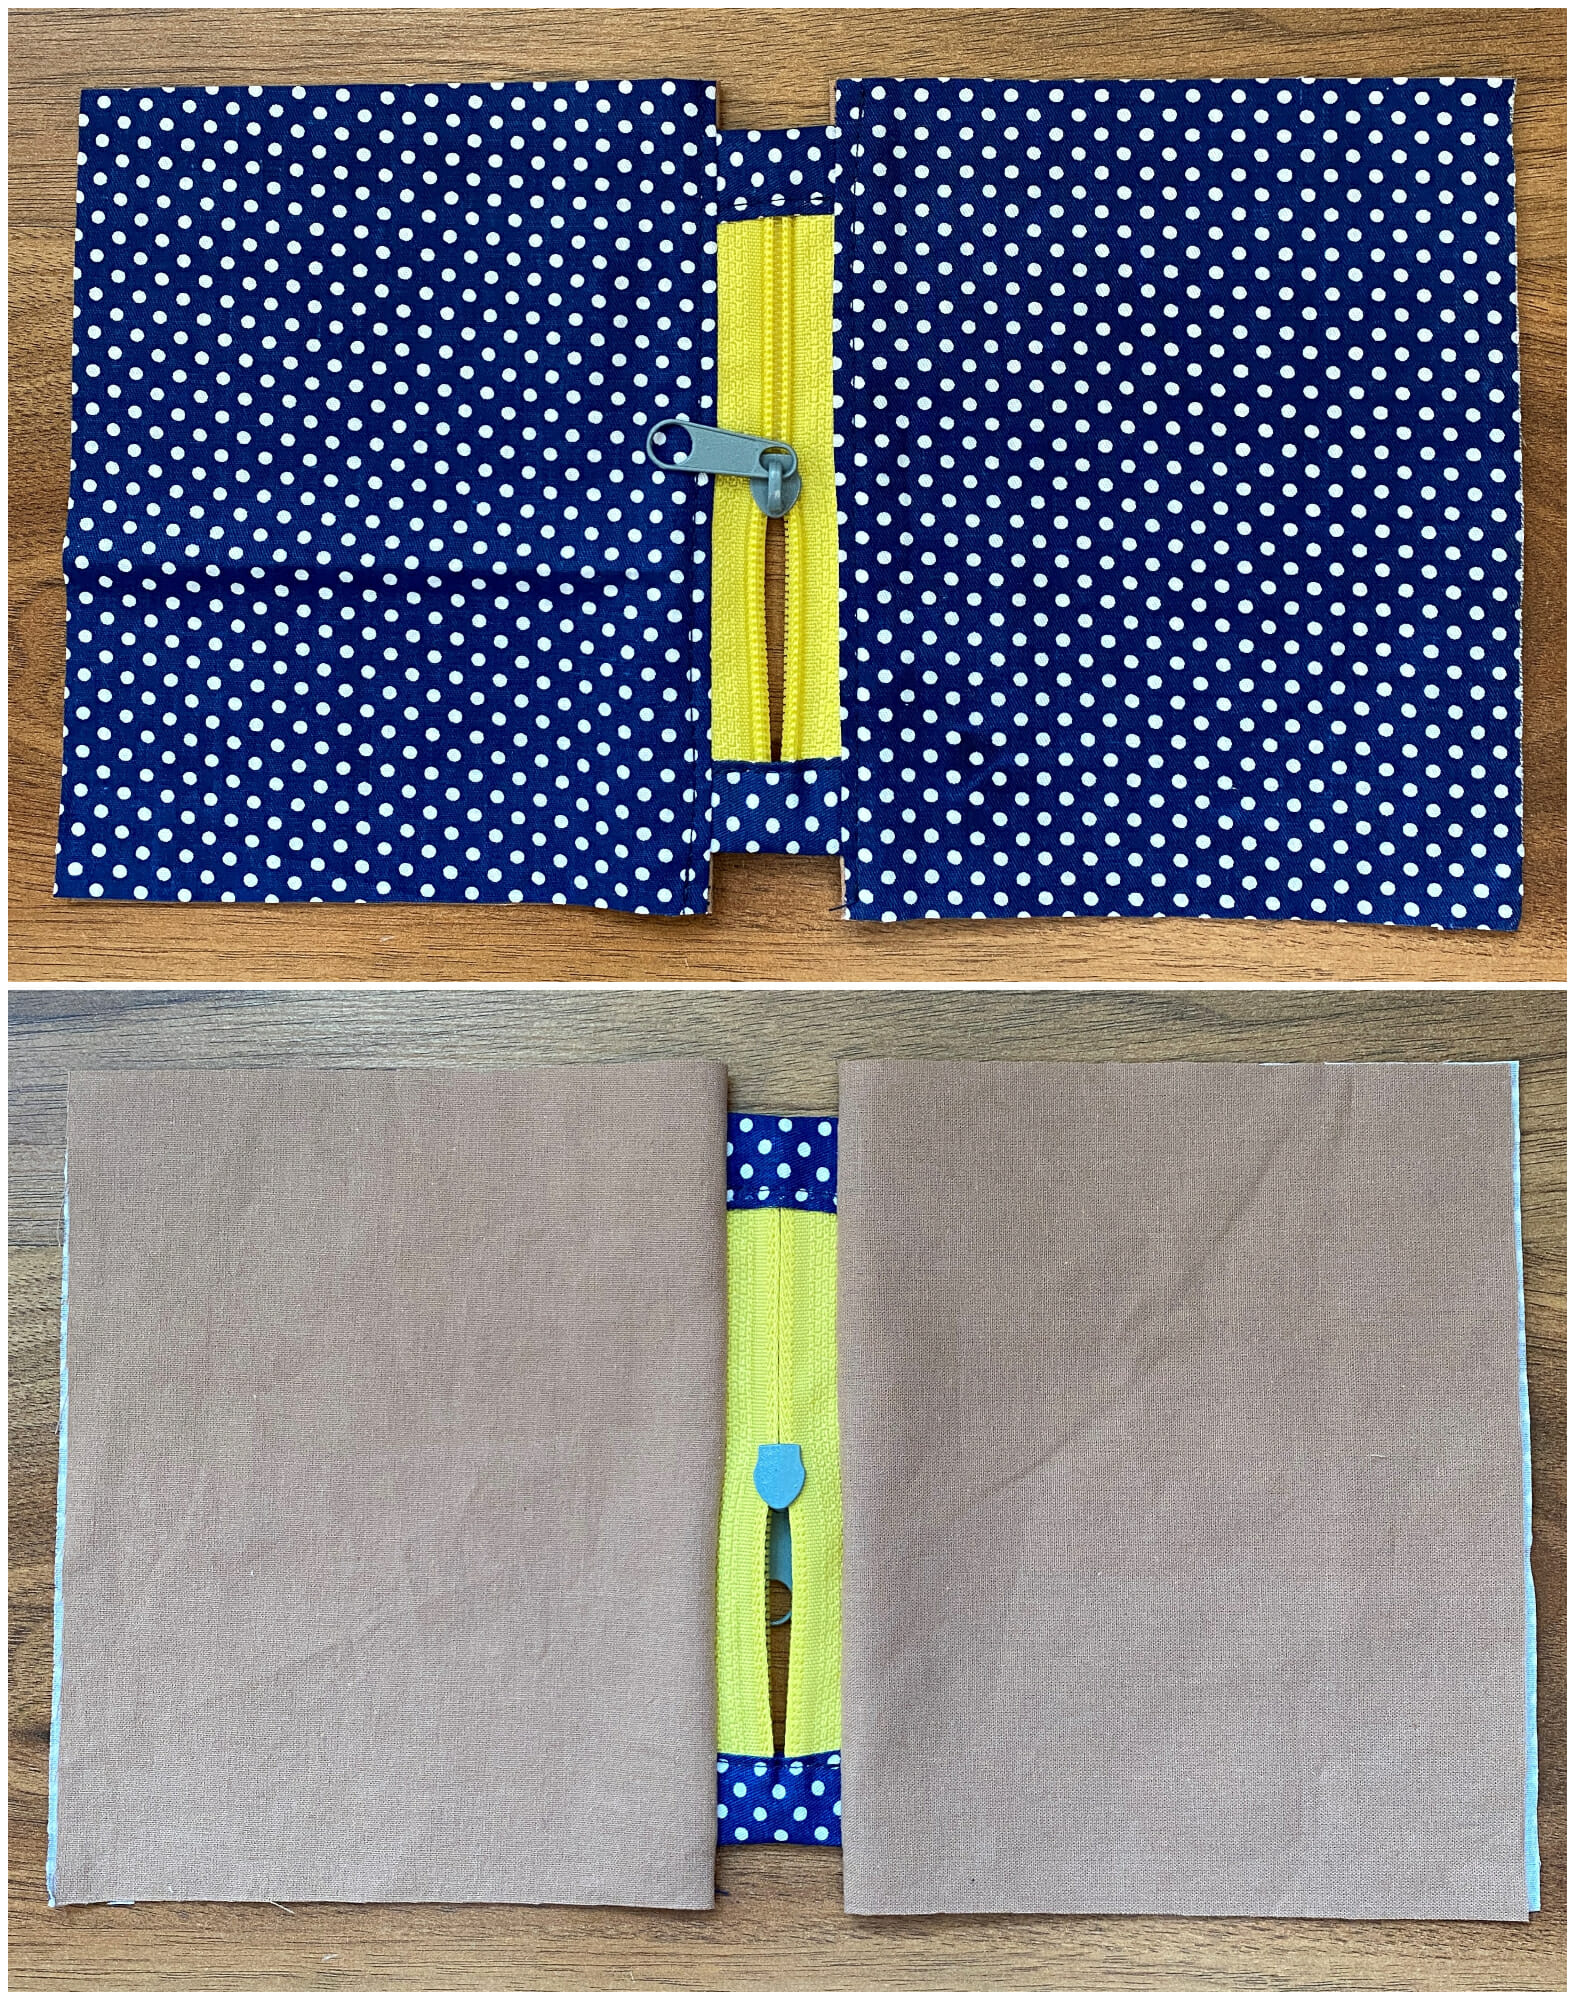 How to sew a lined Zipper Pouch--great for Beginners! 